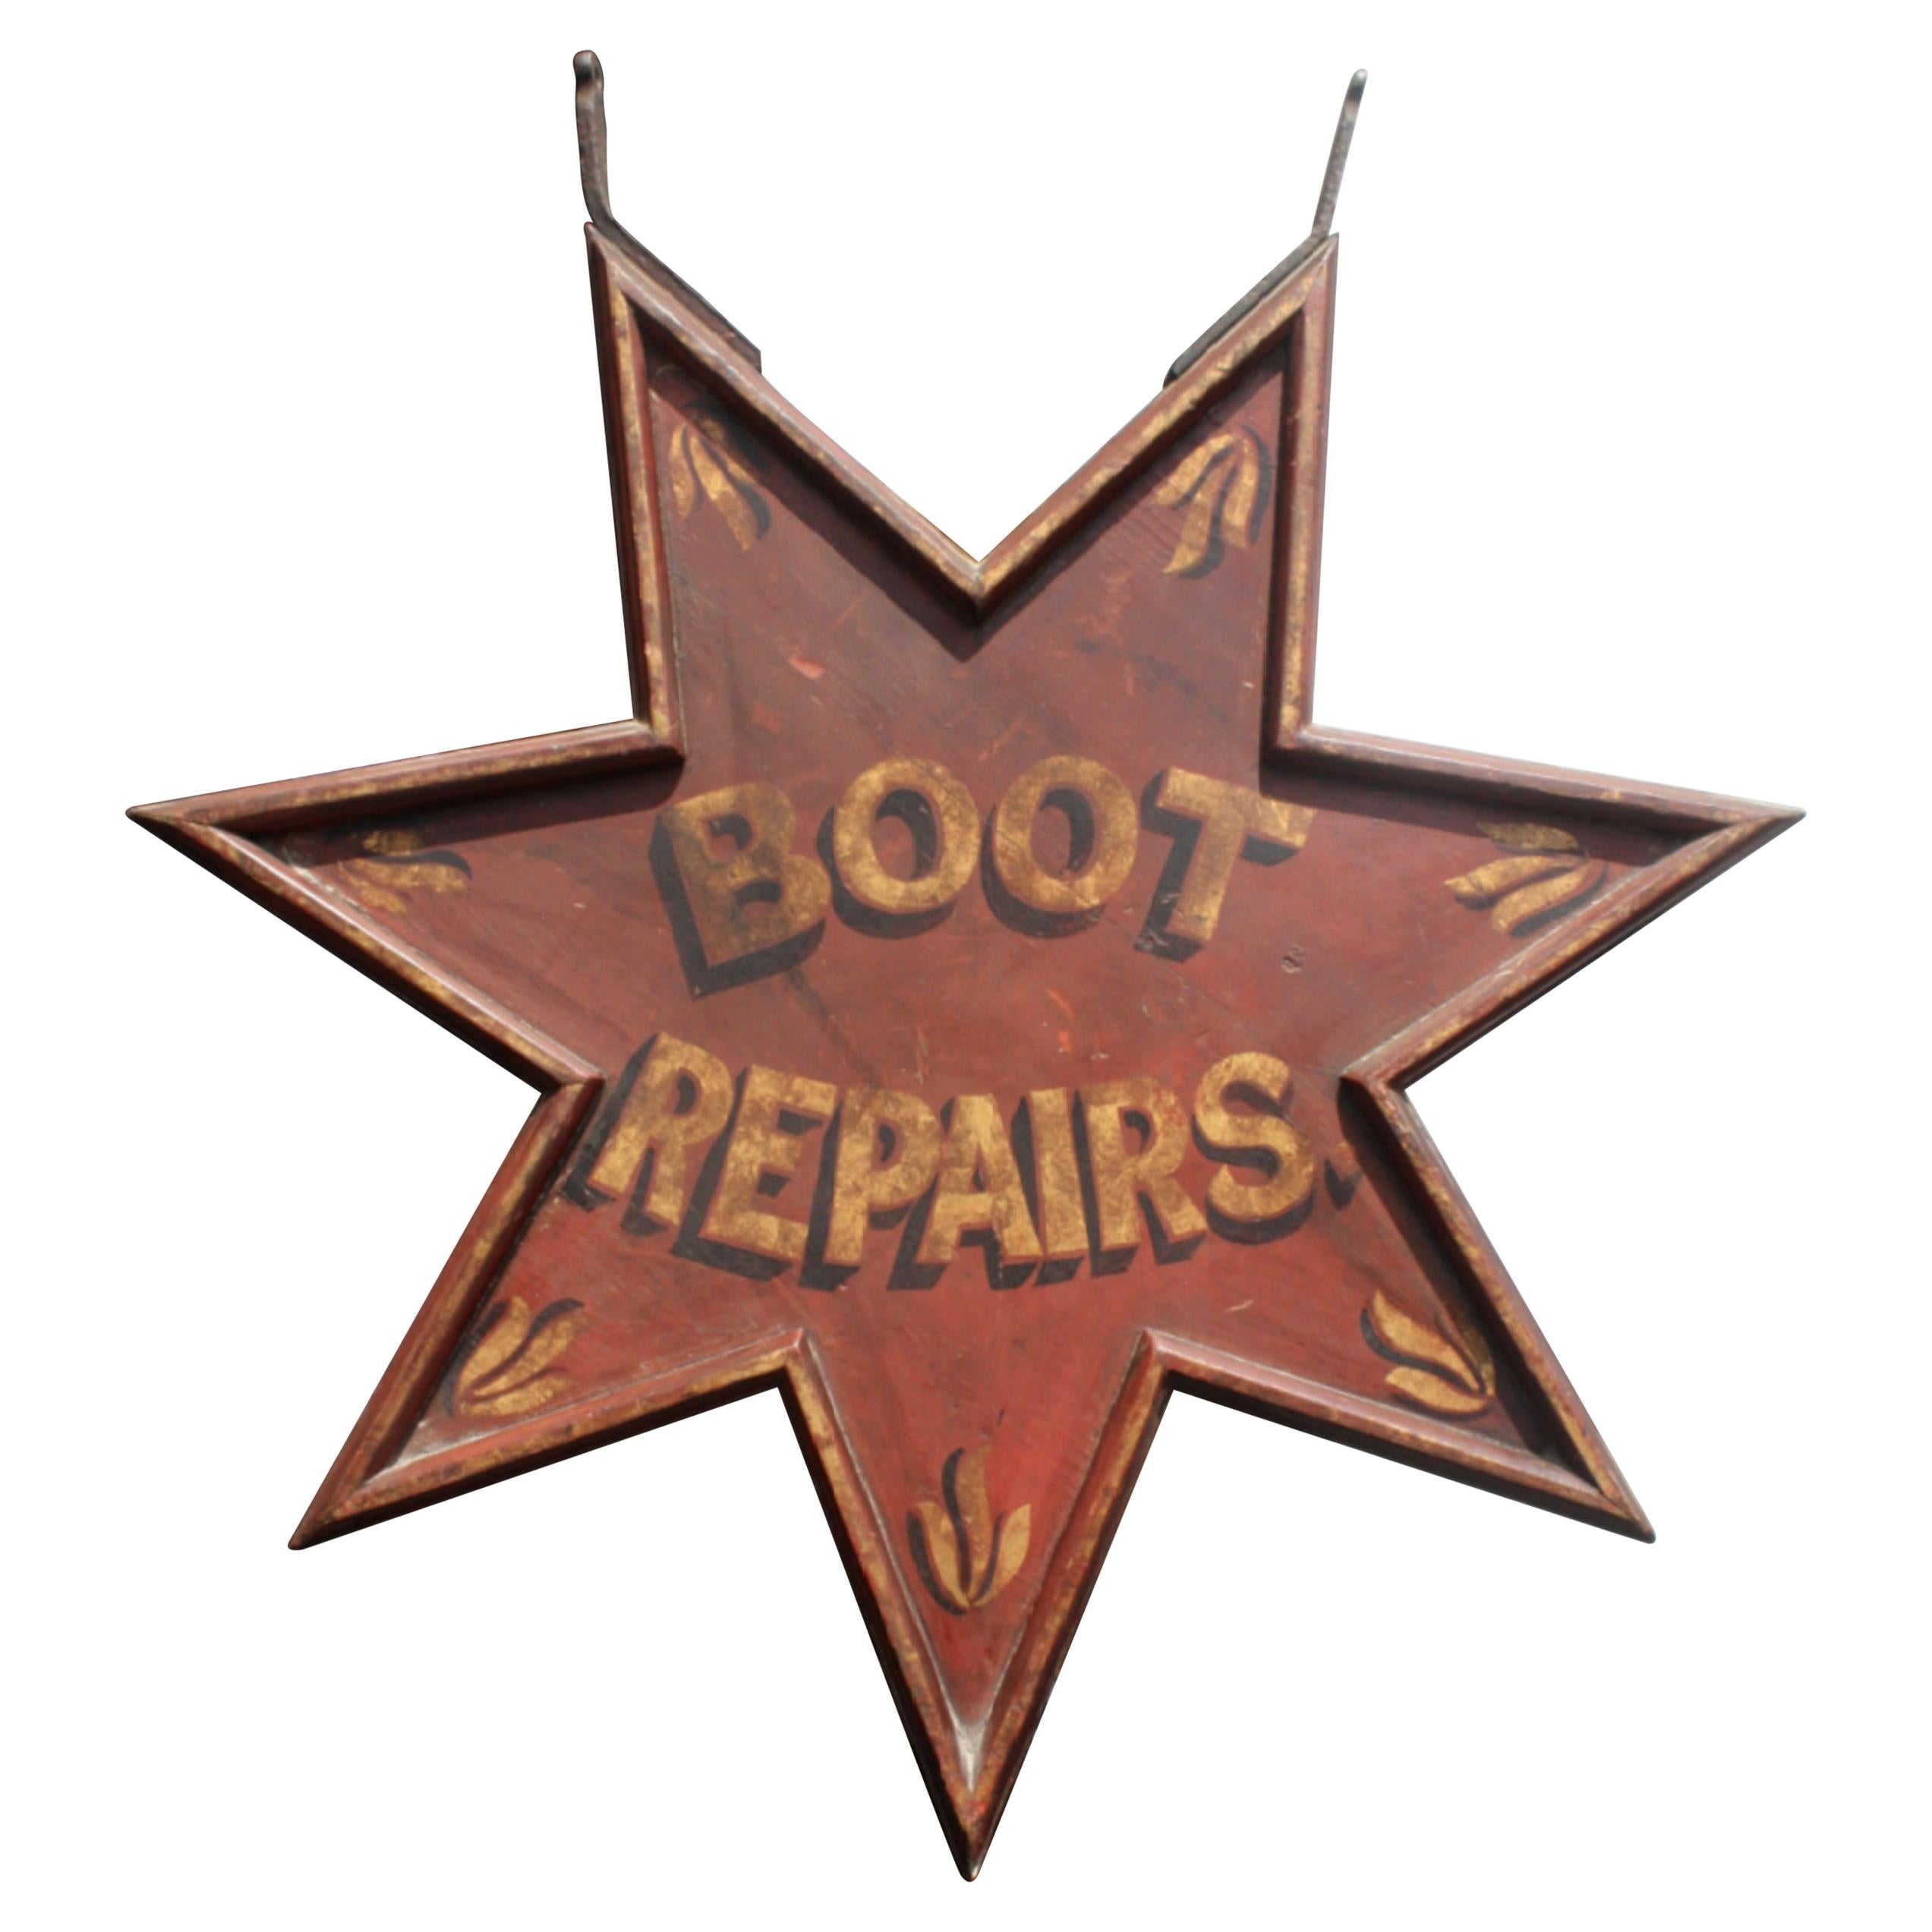 Early 20th Century Red Star Trade Sign Folk Art "Boot Repair" R Kennetts